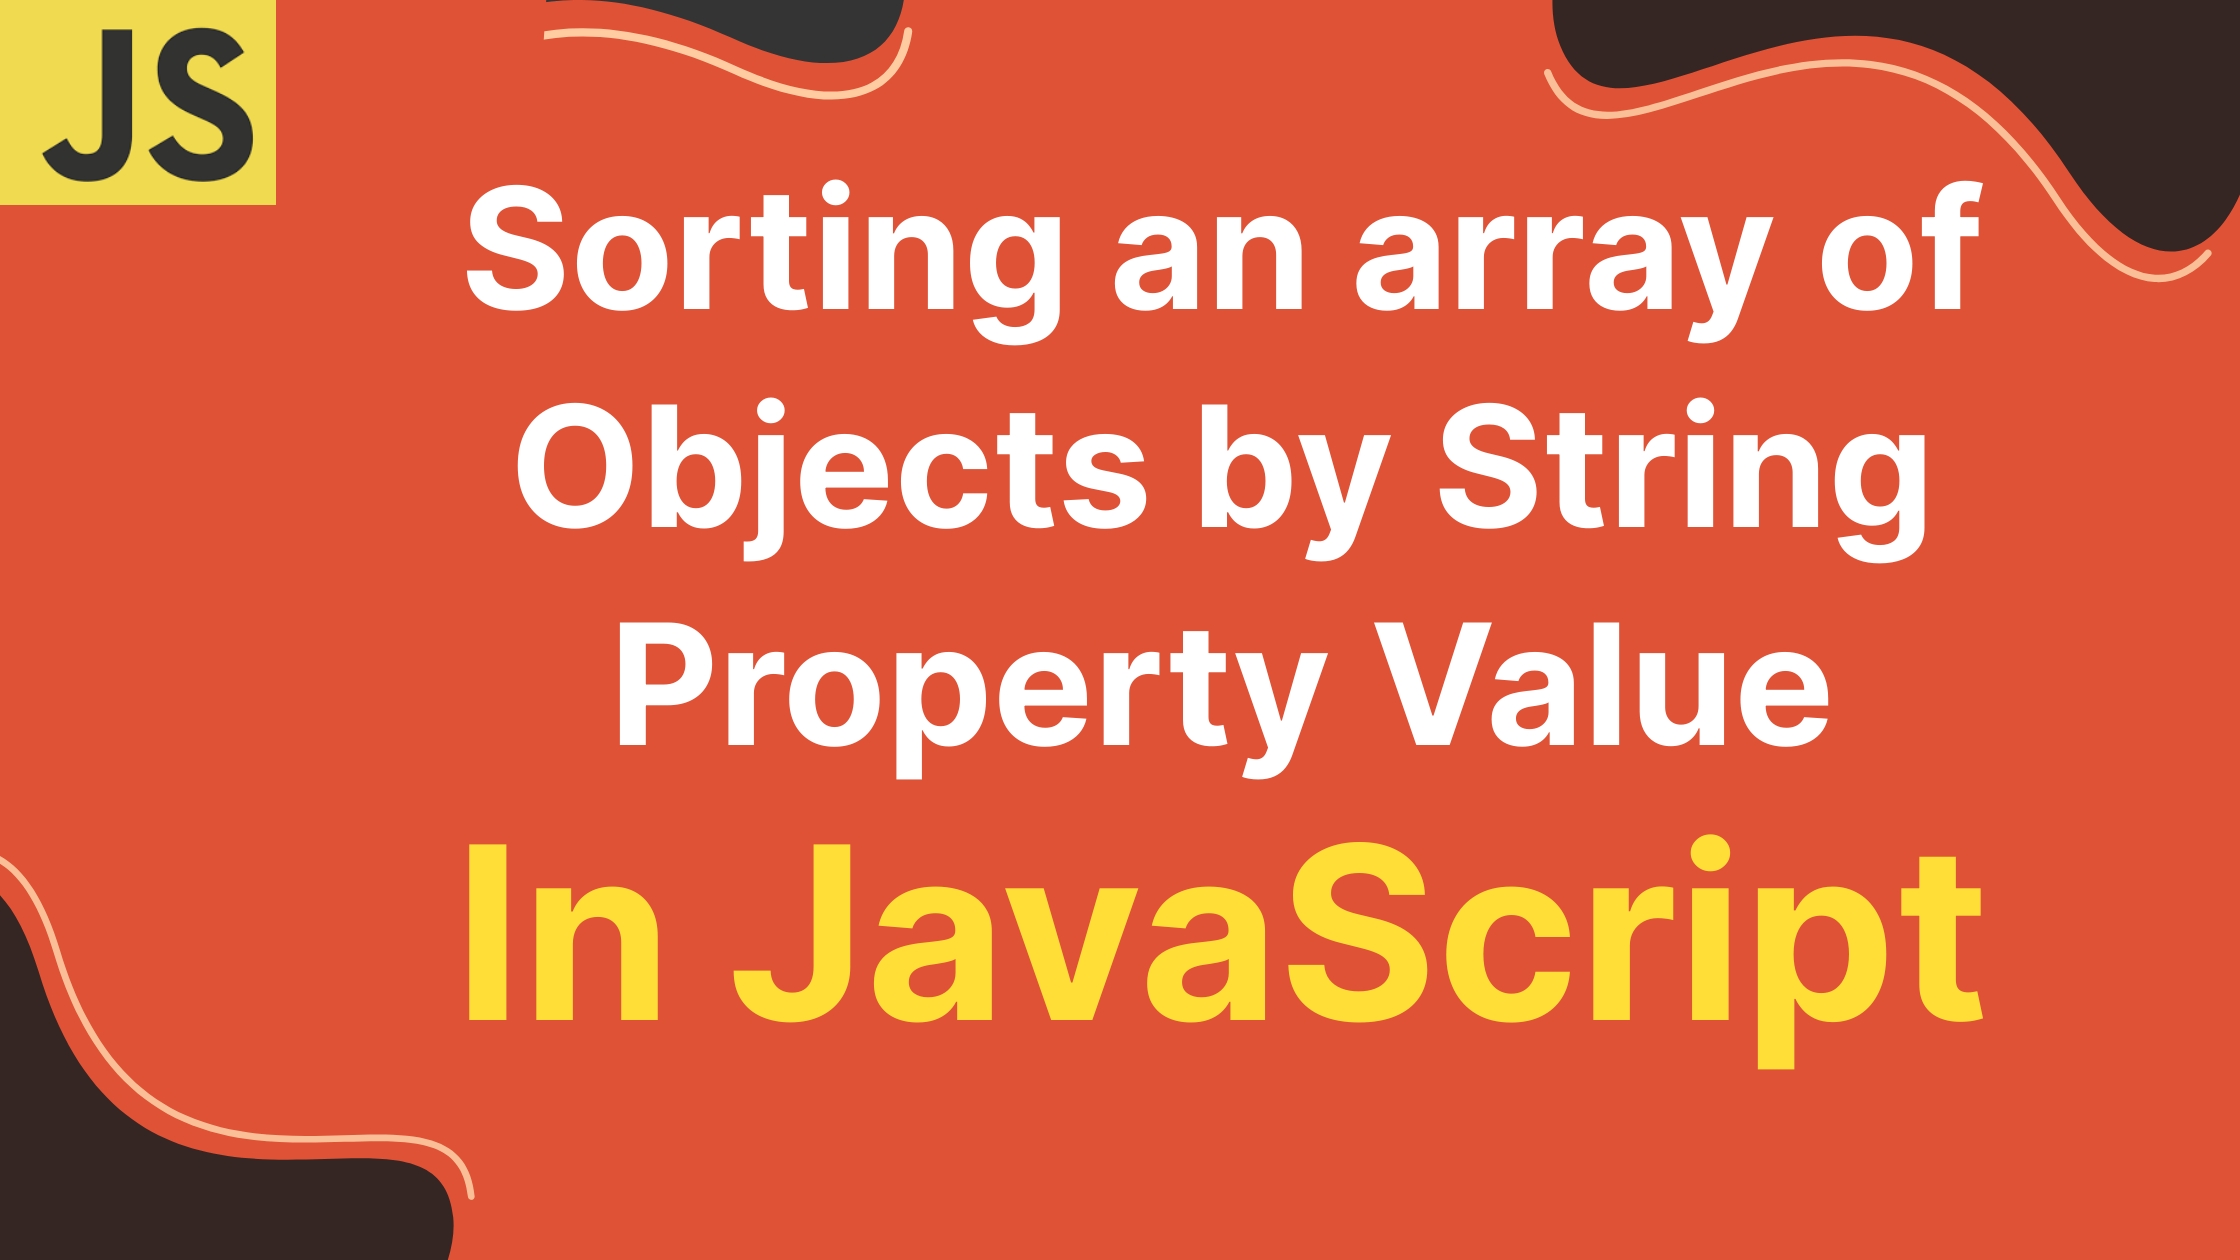 You are currently viewing Sorting an array of Objects by String Property Value